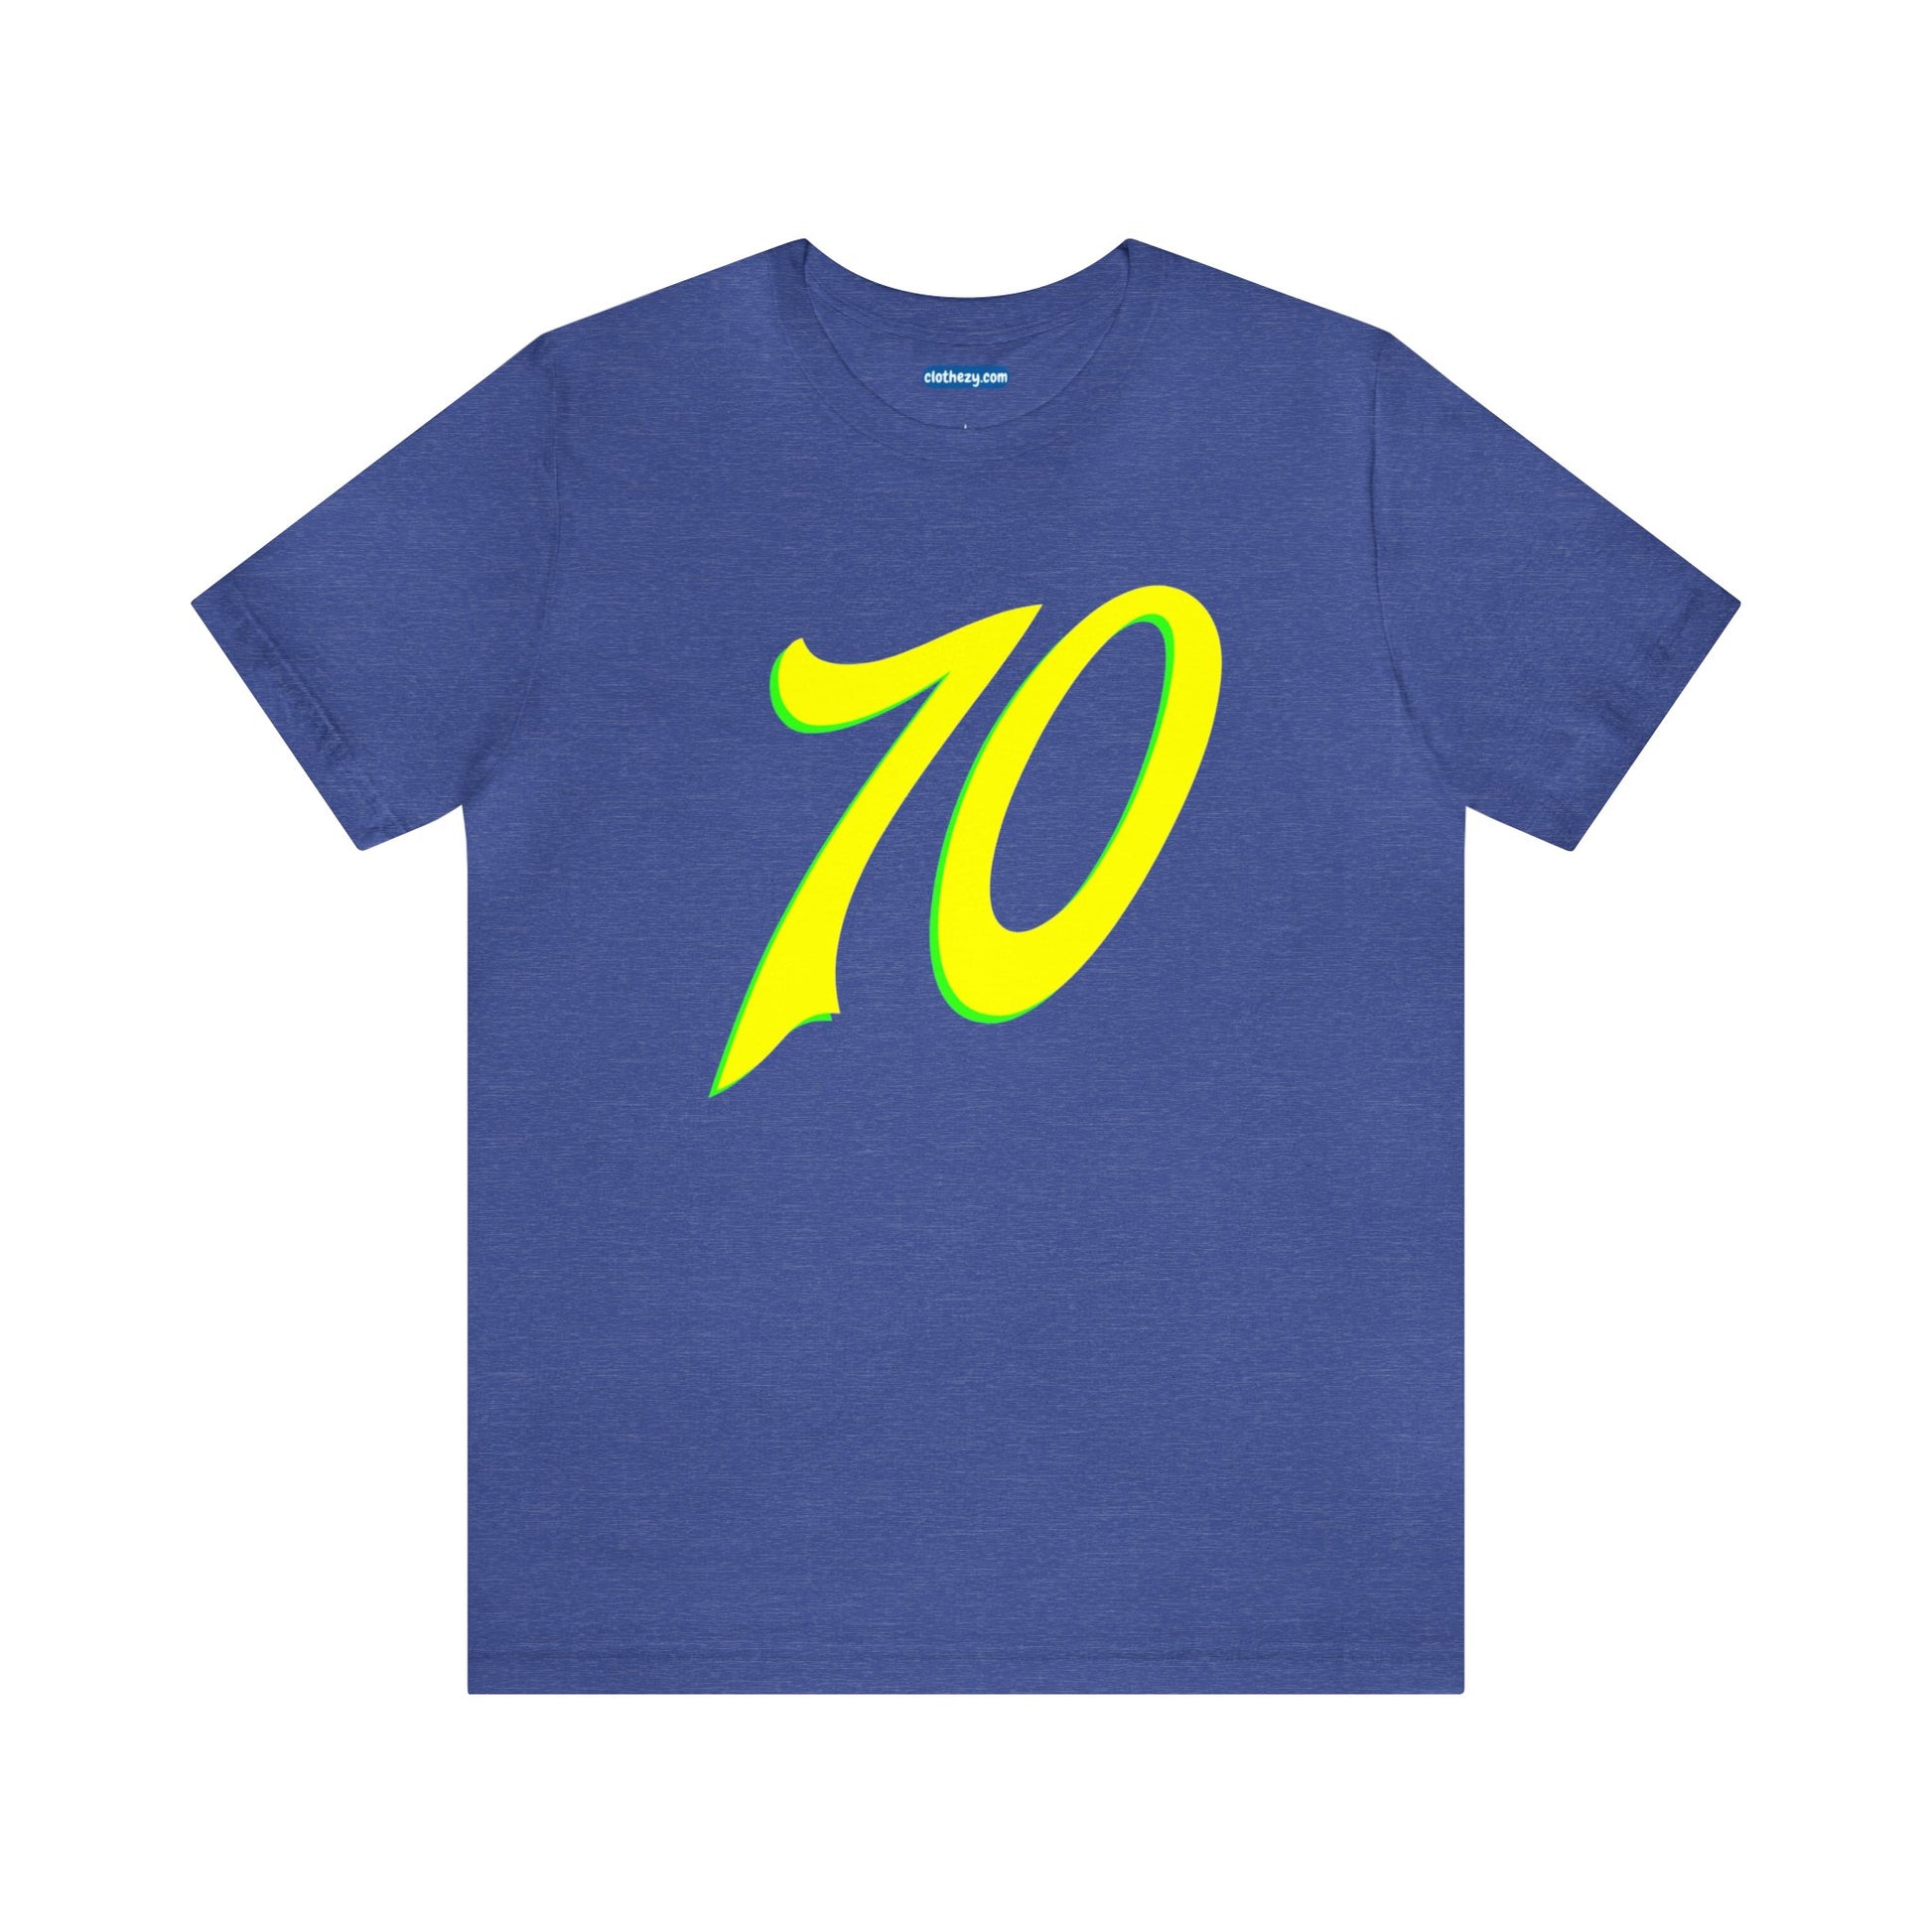 Number 70 Design - Soft Cotton Tee for birthdays and celebrations, Gift for friends and family, Multiple Options by clothezy.com in Navy Size Small - Buy Now